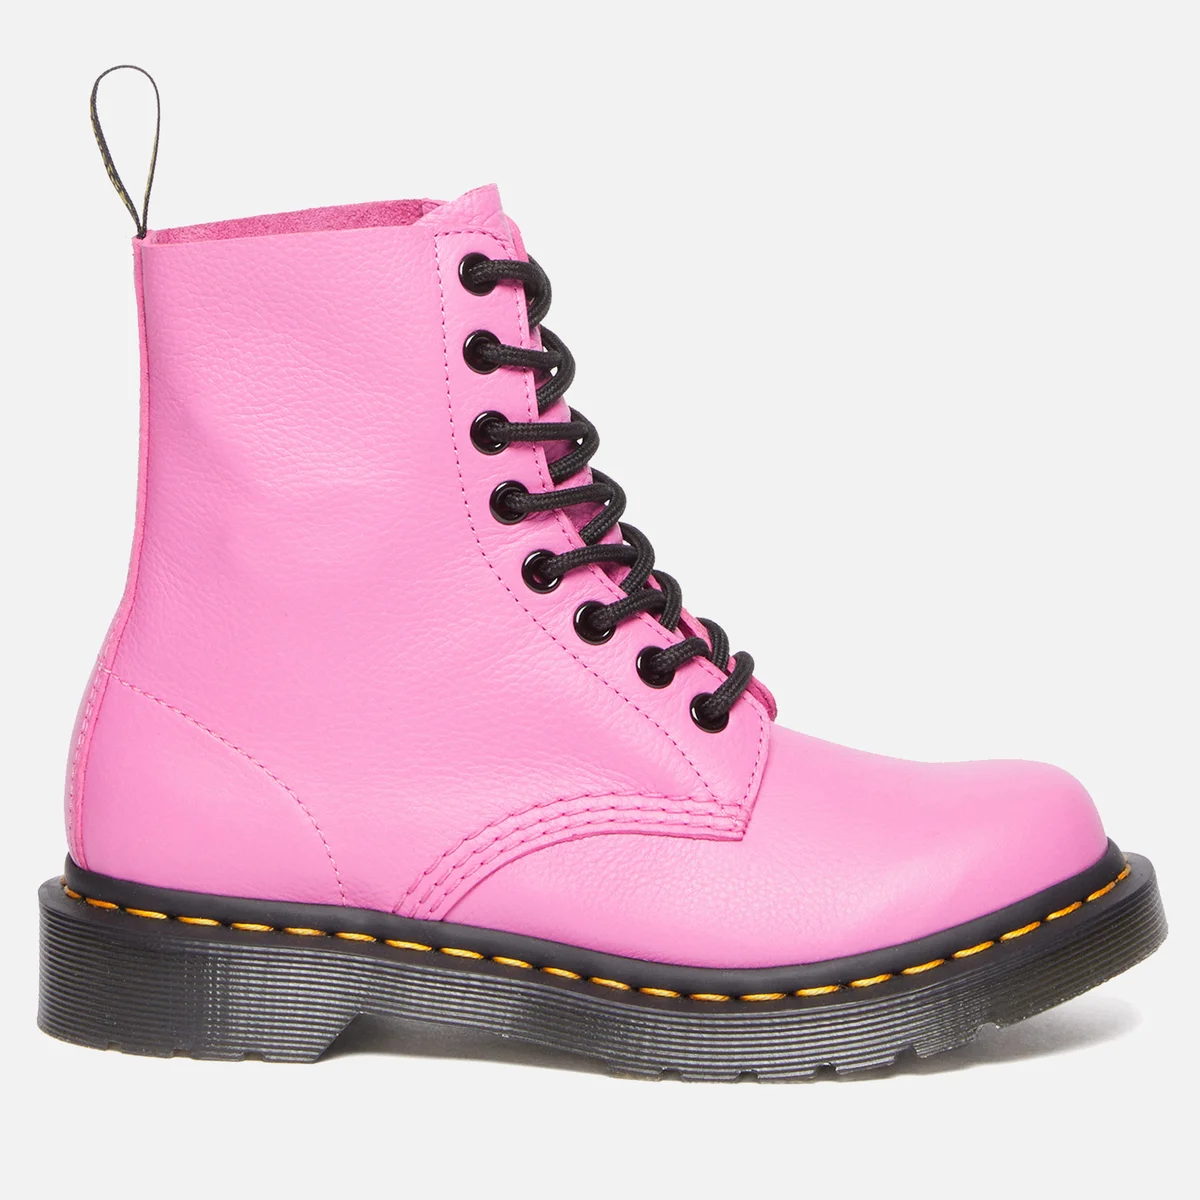 Dr. Martens Women's 1460 Pascal Virginia Leather 8-Eye Boots Image 1